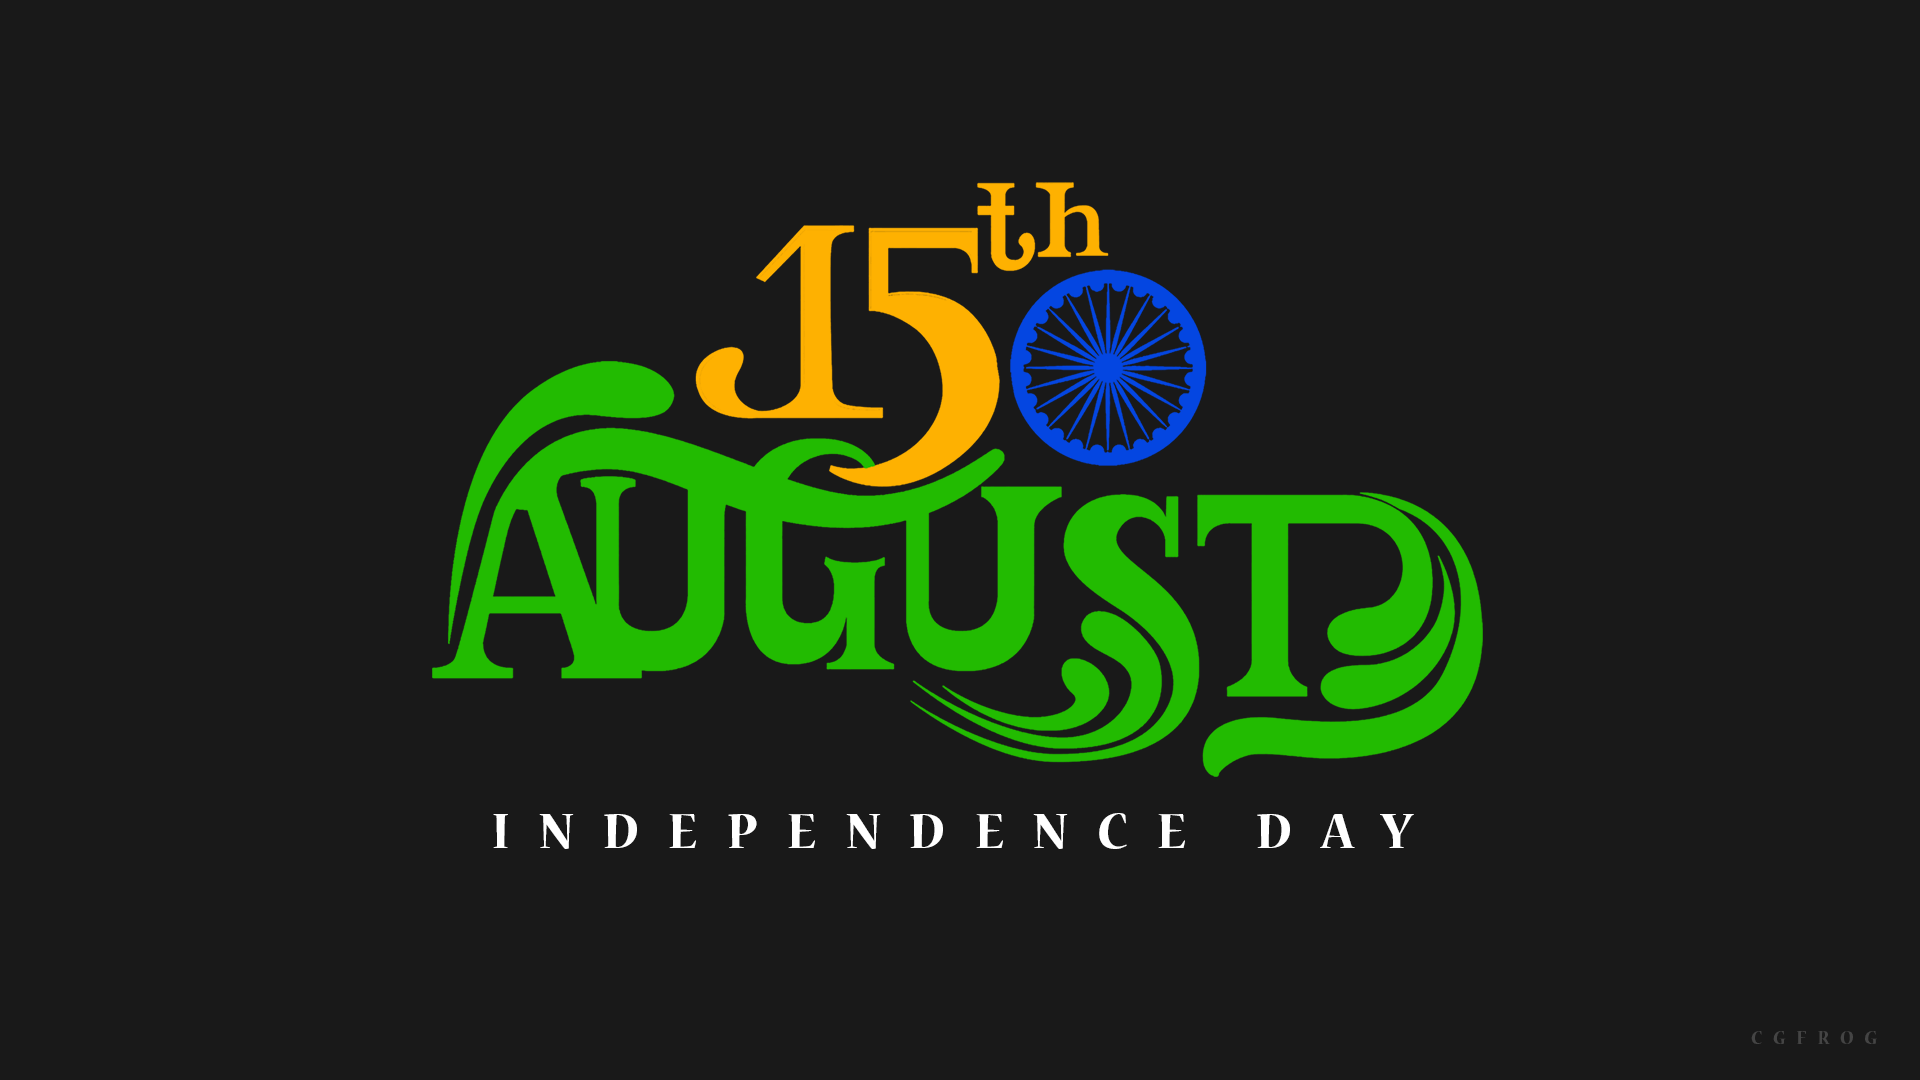 Patriotic Wallpapers And Greetings Independence Day - 15 August Happy Independence Day - HD Wallpaper 